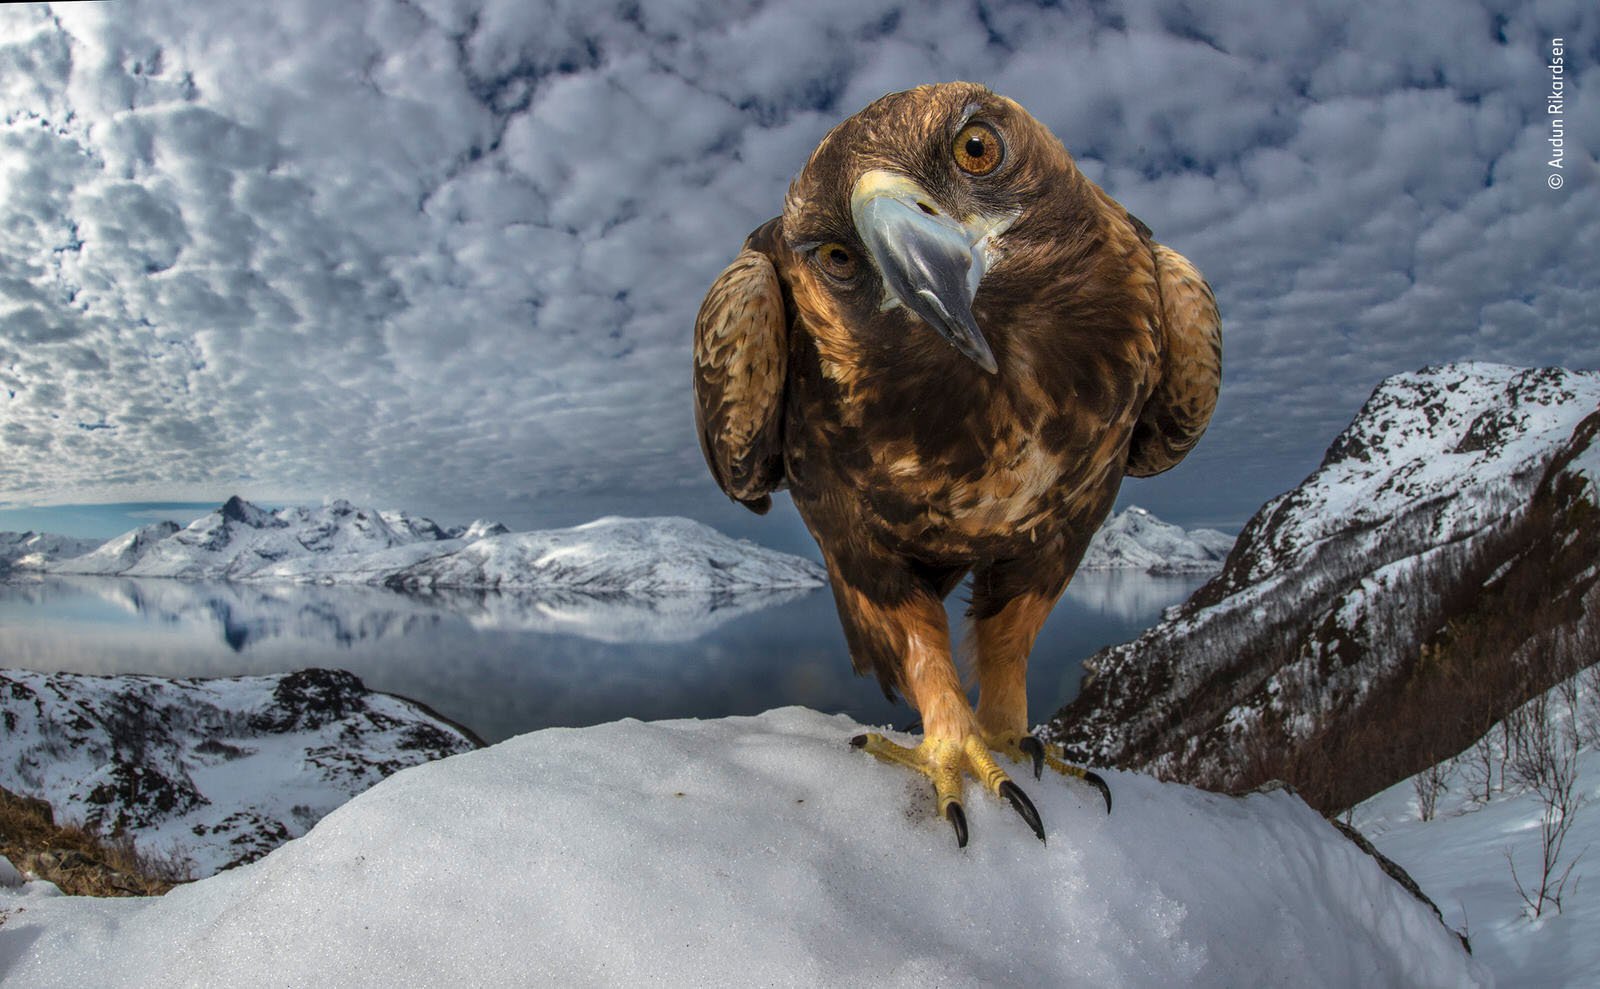 25 People's Choice Photos for Wildlife Photographer of the Year 2019